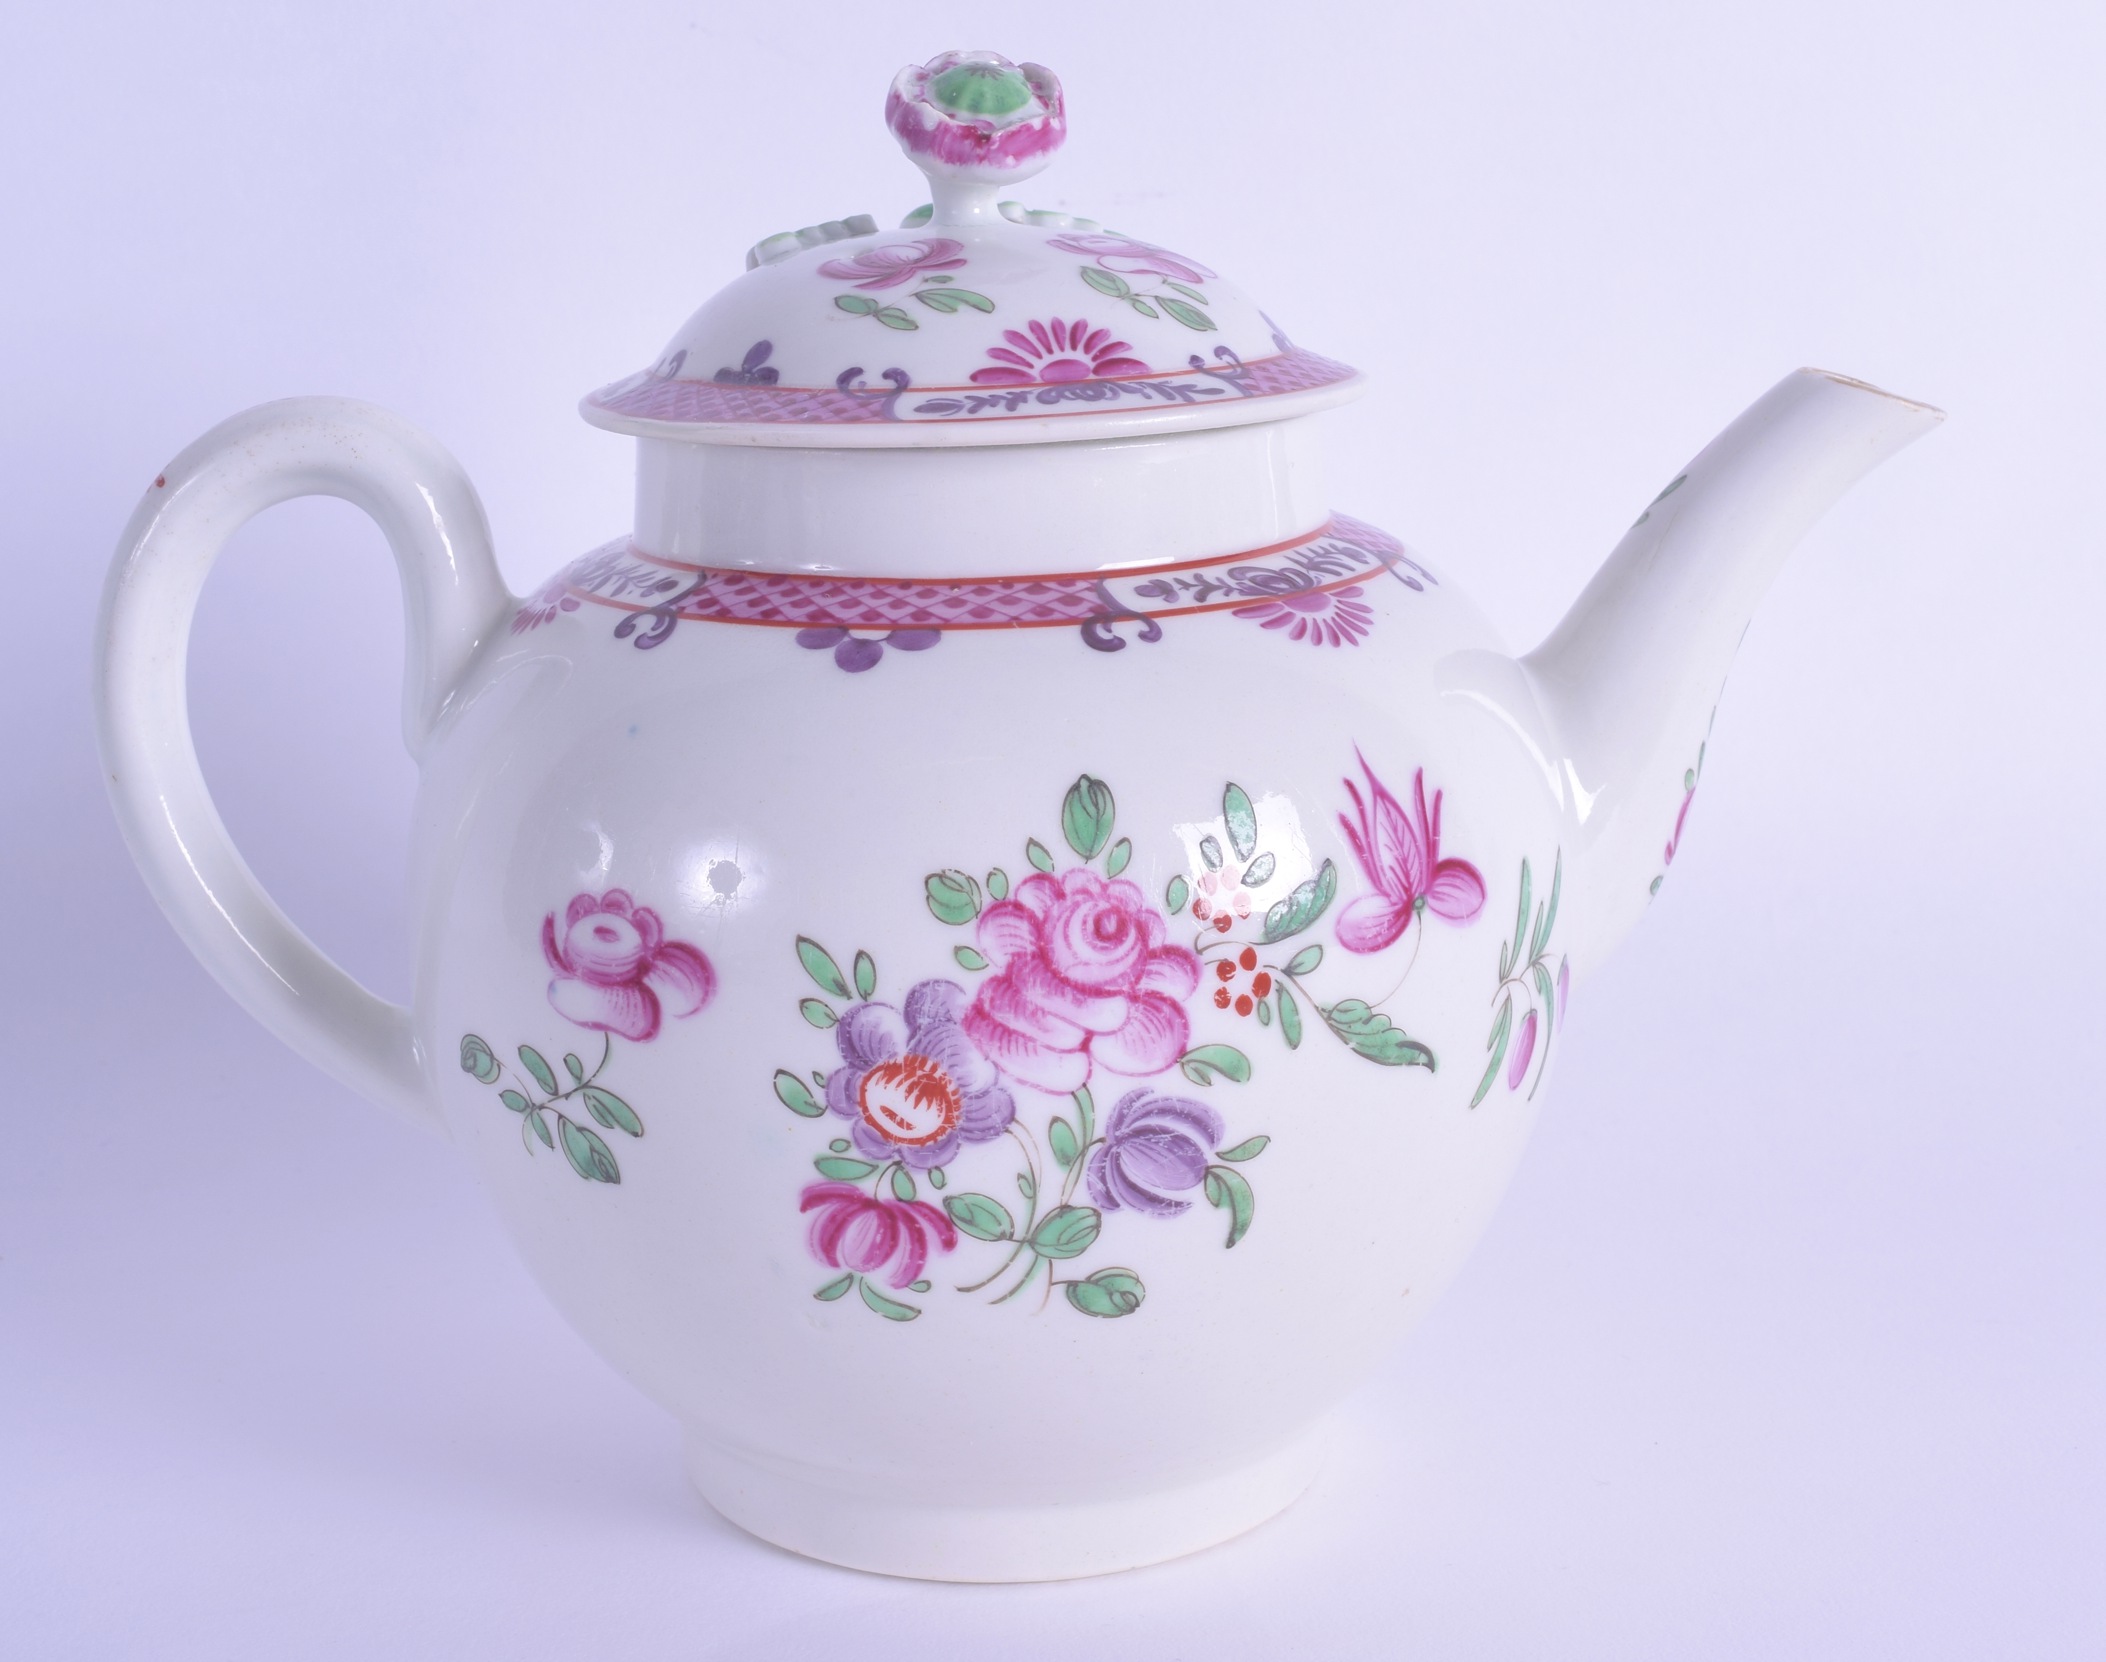 18th c. Worcester good teapot and cover painted in Chinese export style with flowers and a pink - Image 2 of 3